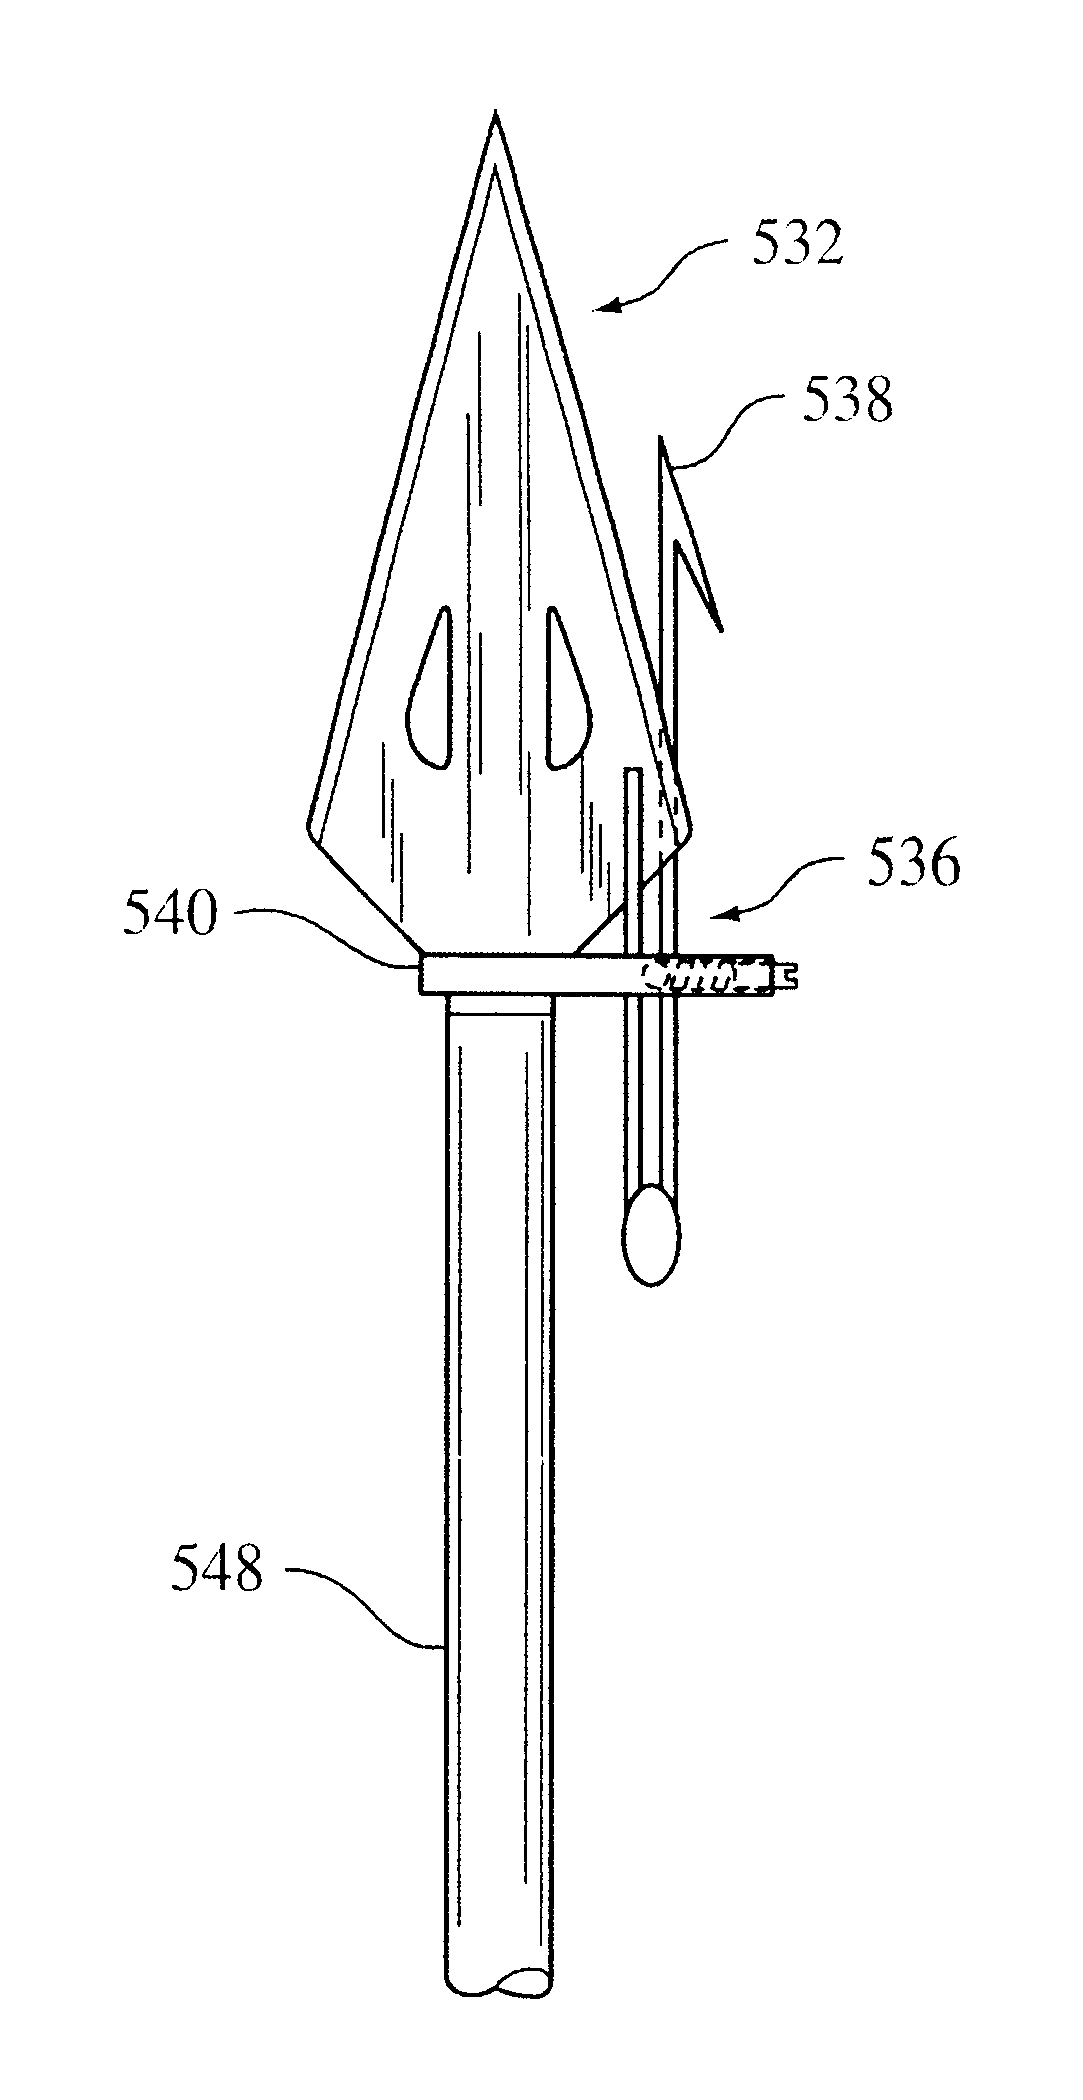 Tracking system, apparatus and method